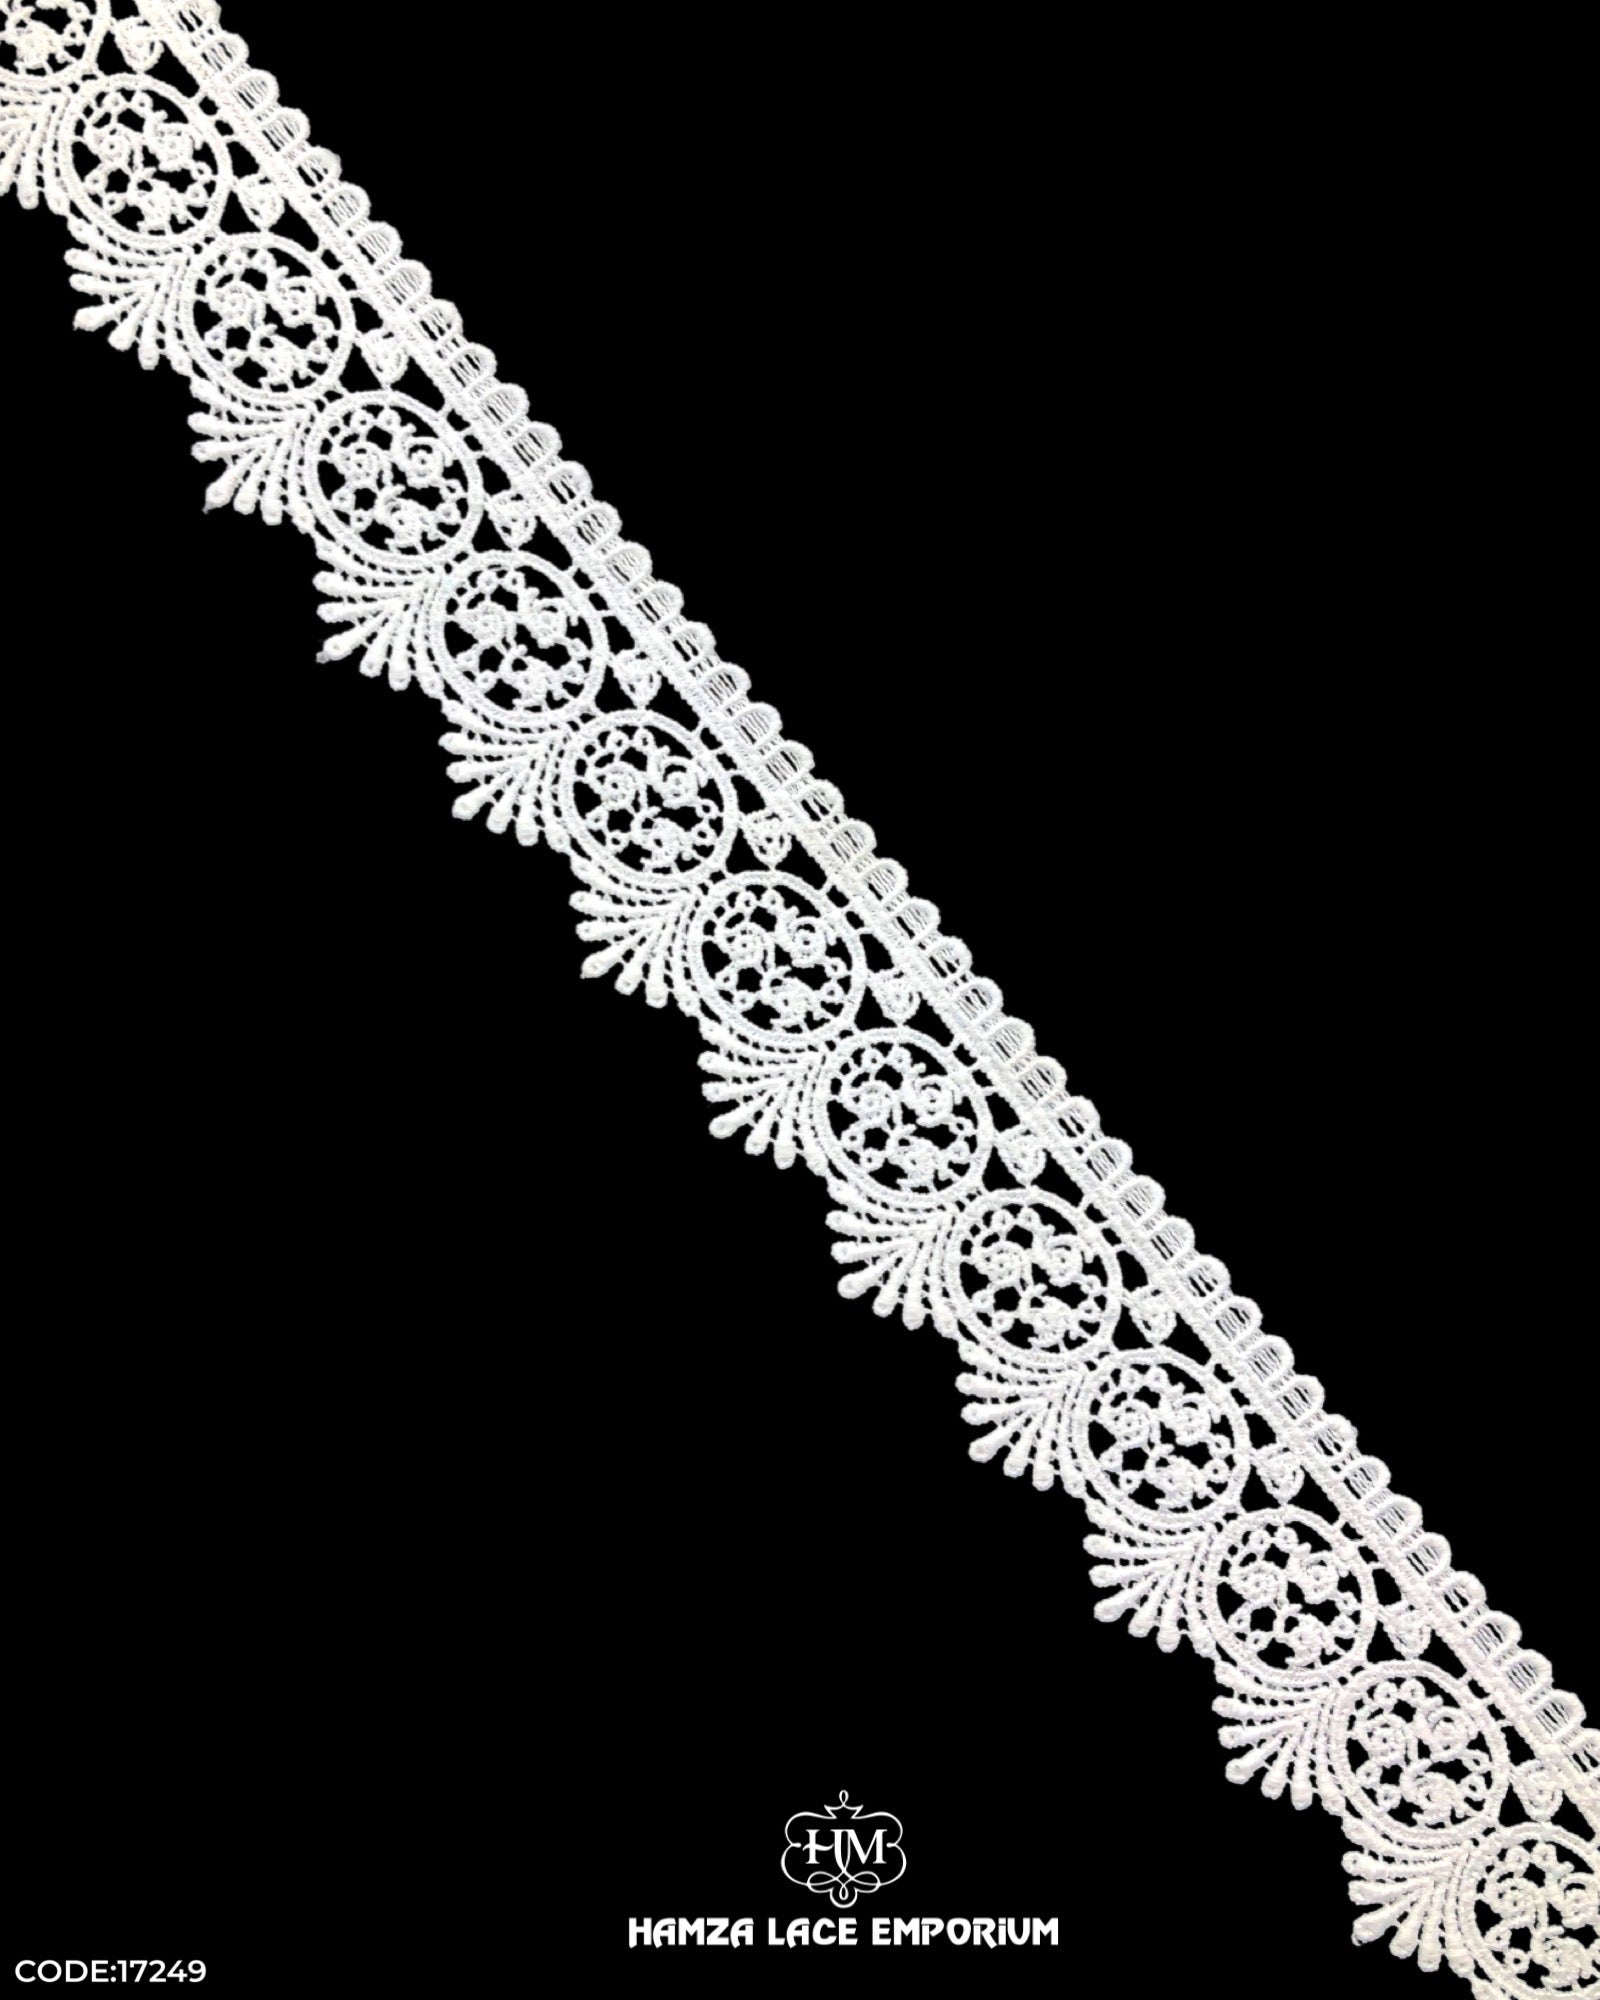 'Edging Flower Design Lace 17249' with the name 'Hamza Lace' written at the bottom